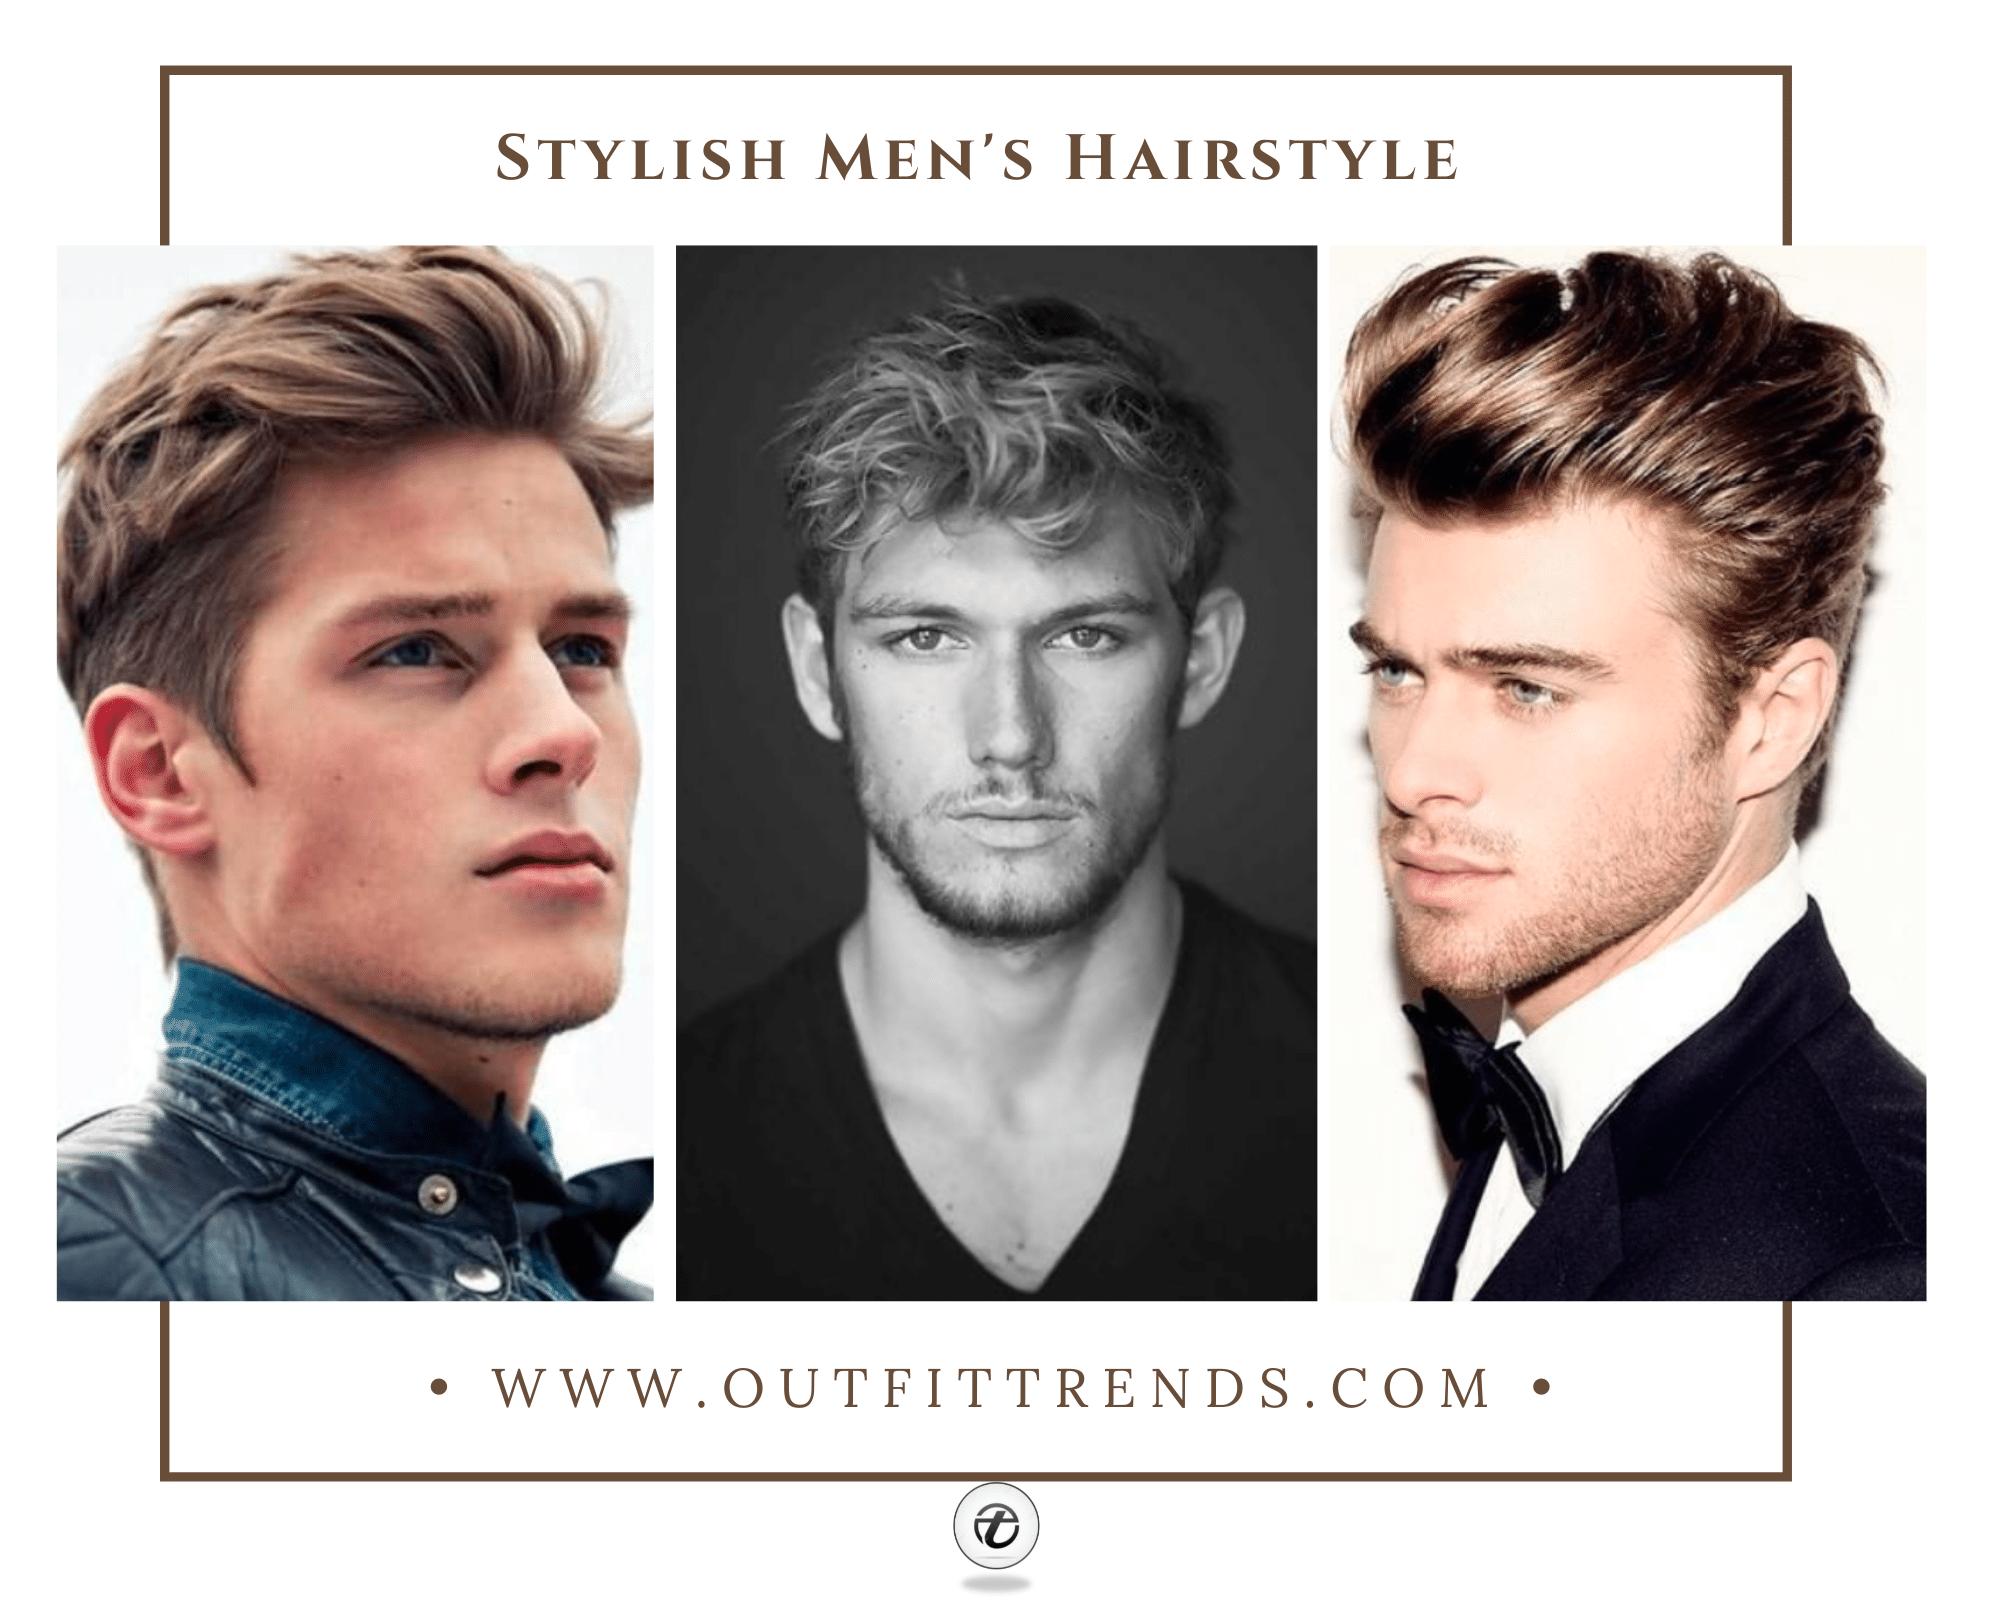 Holiday Hairstyles For Men - Bangstyle - House of Hair Inspiration